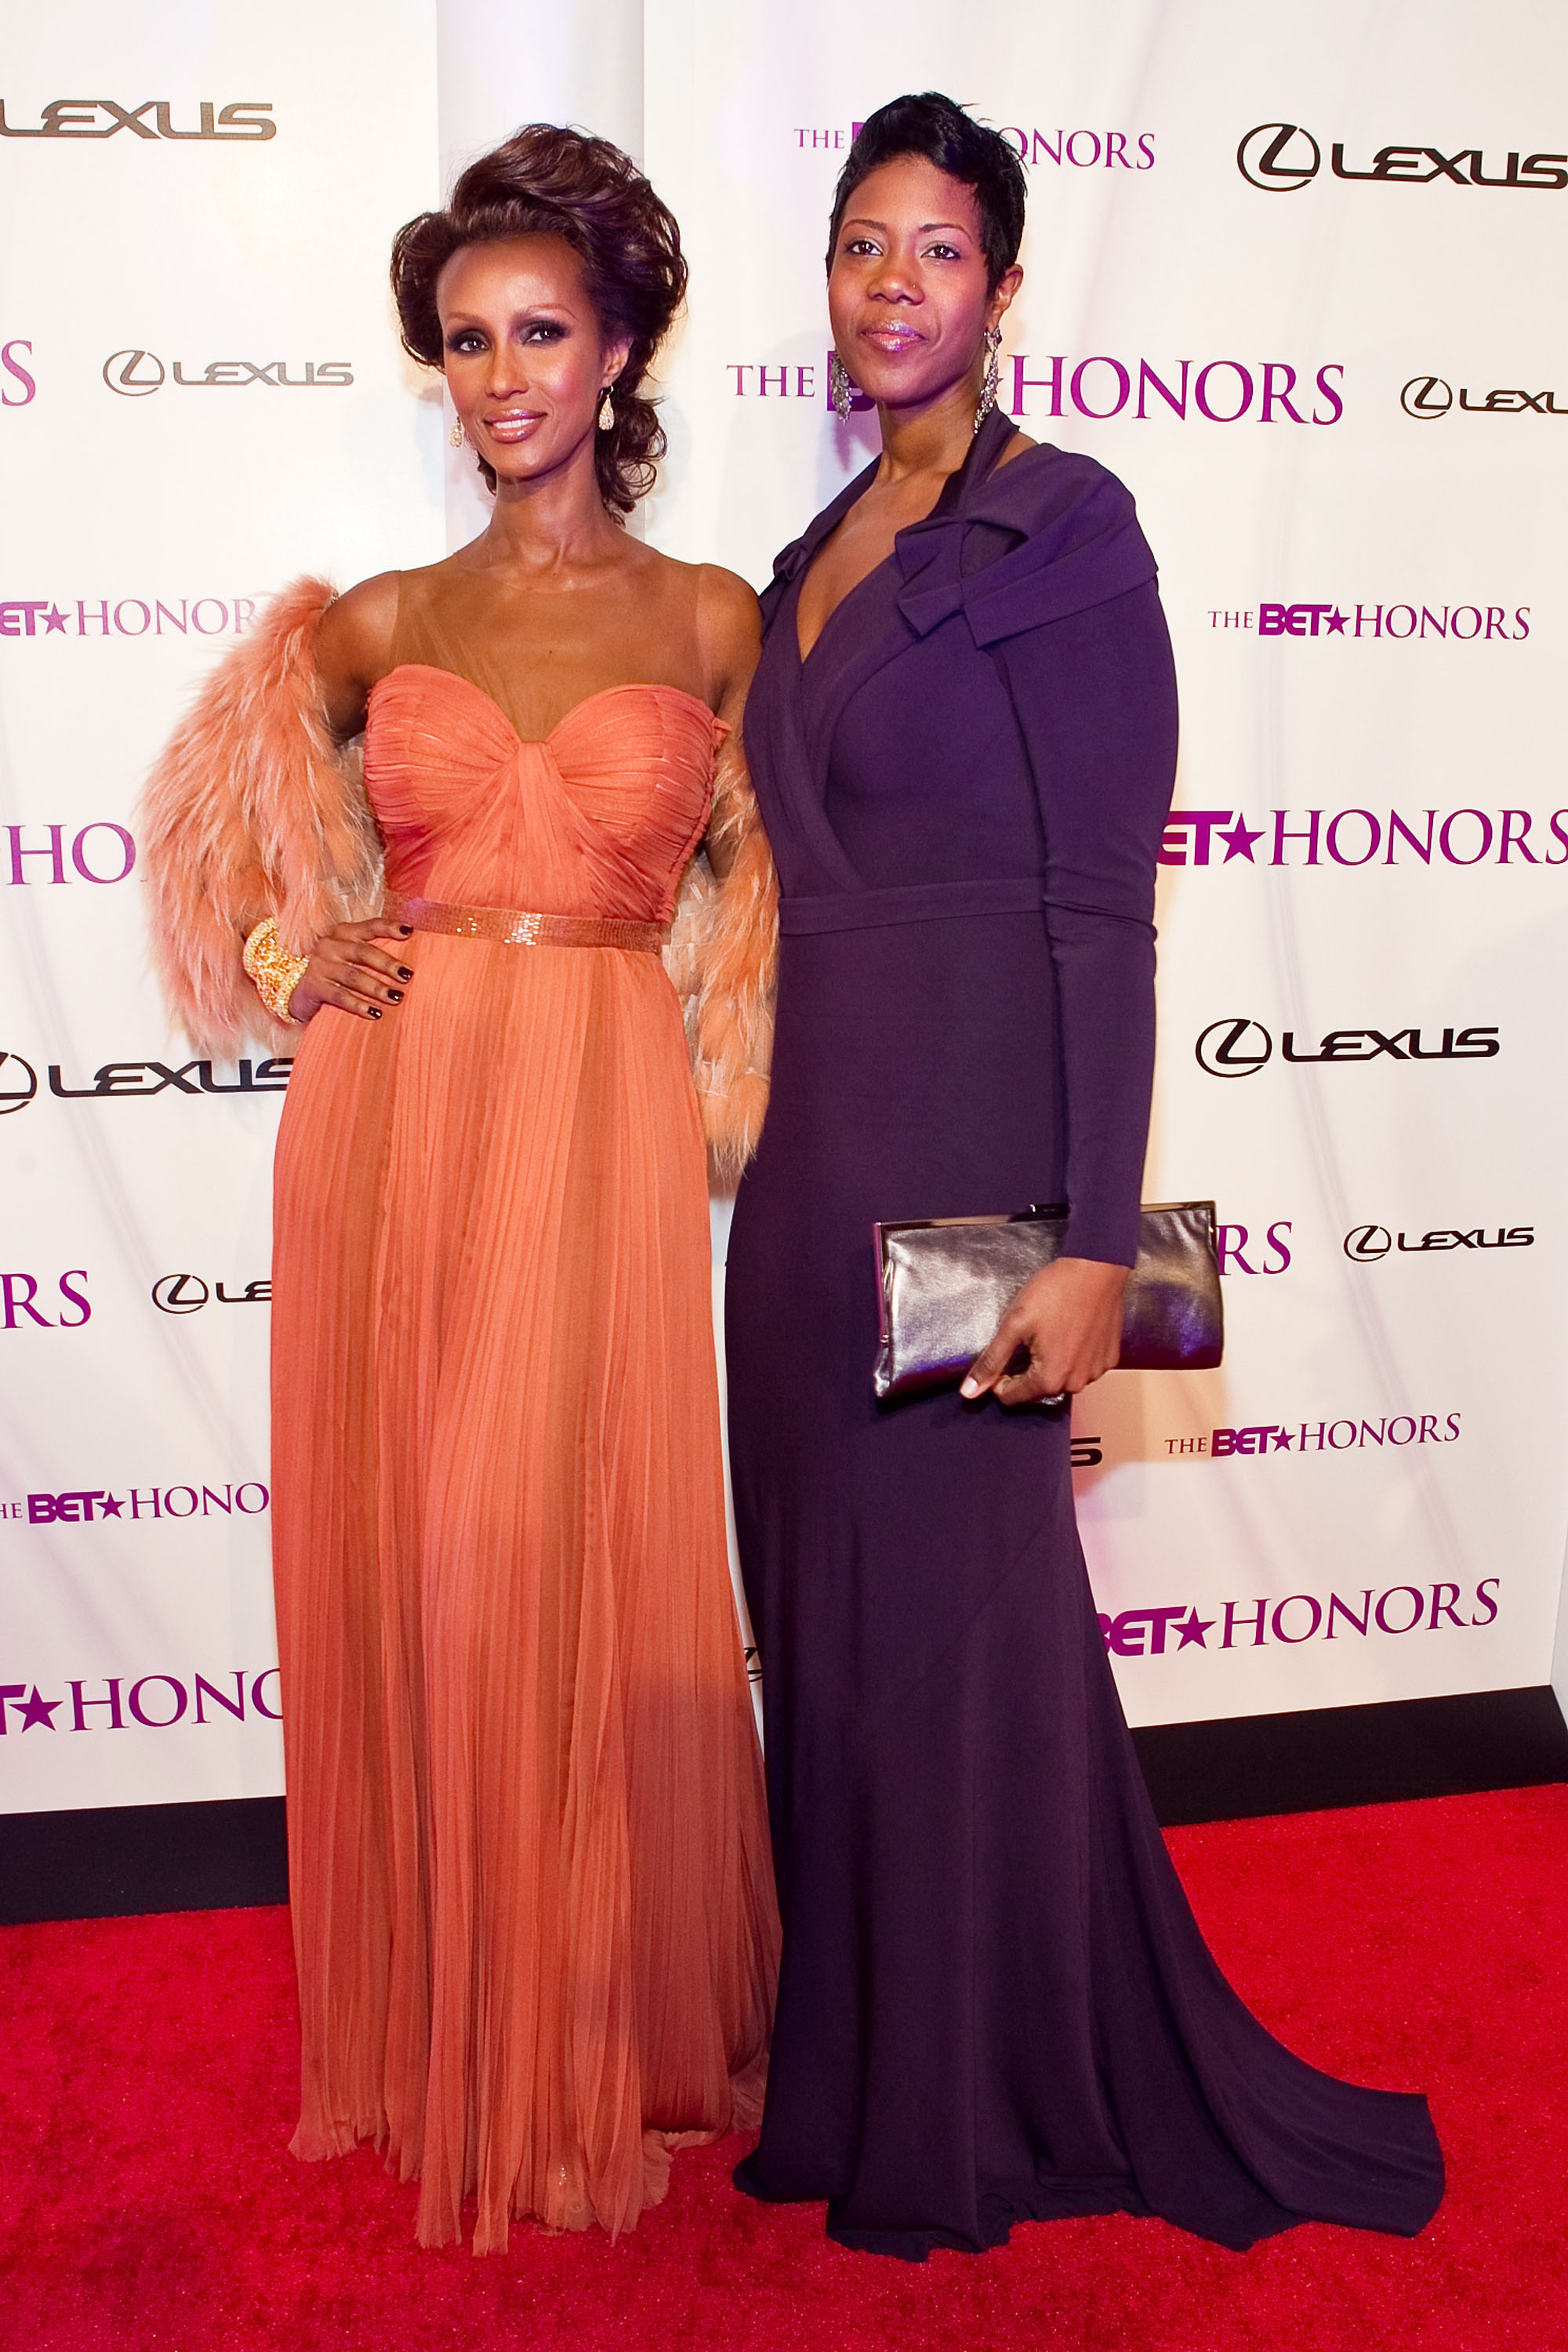 Iman and Zulekha Haywood arrive at the 4th annual BET Honors at the Warner Theatre on January 15, 2011, in Washington, DC |  Source: Getty Images